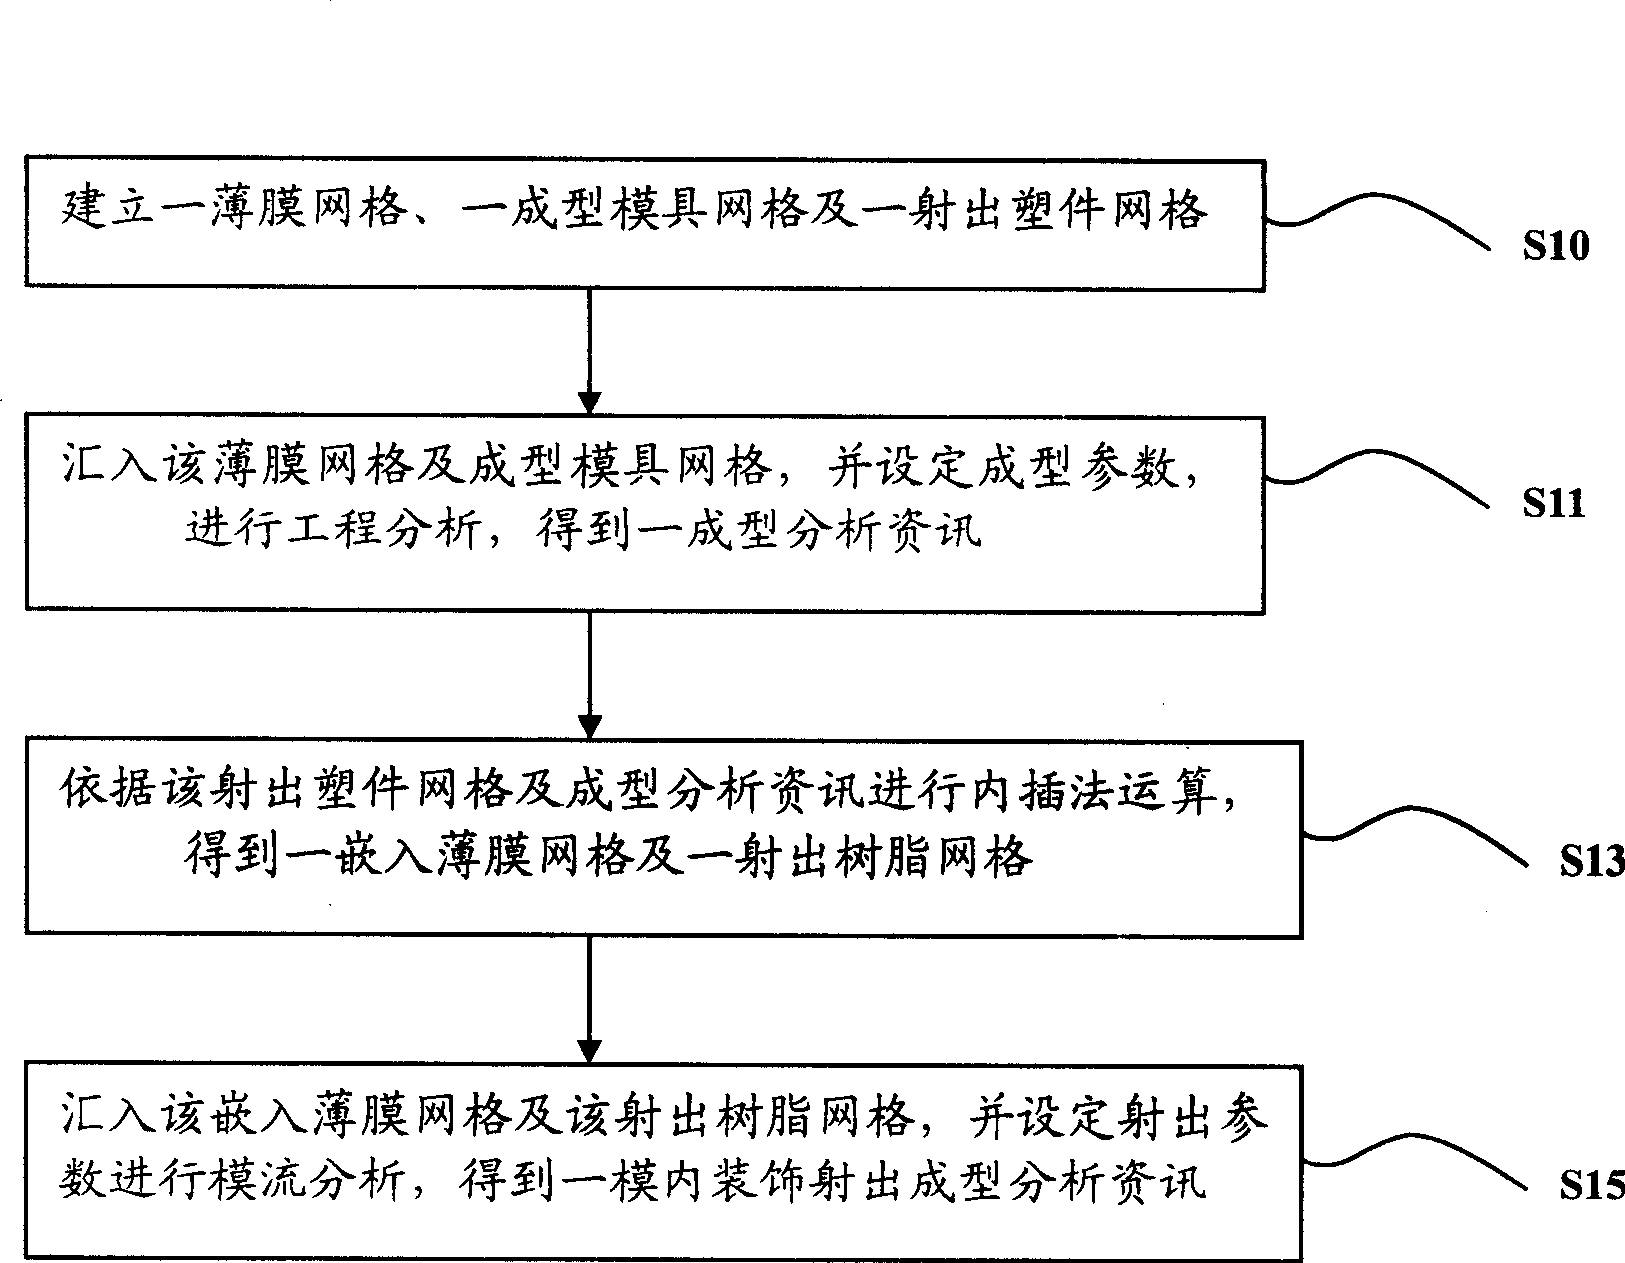 Analysis method used for in-mold decoration injection molding